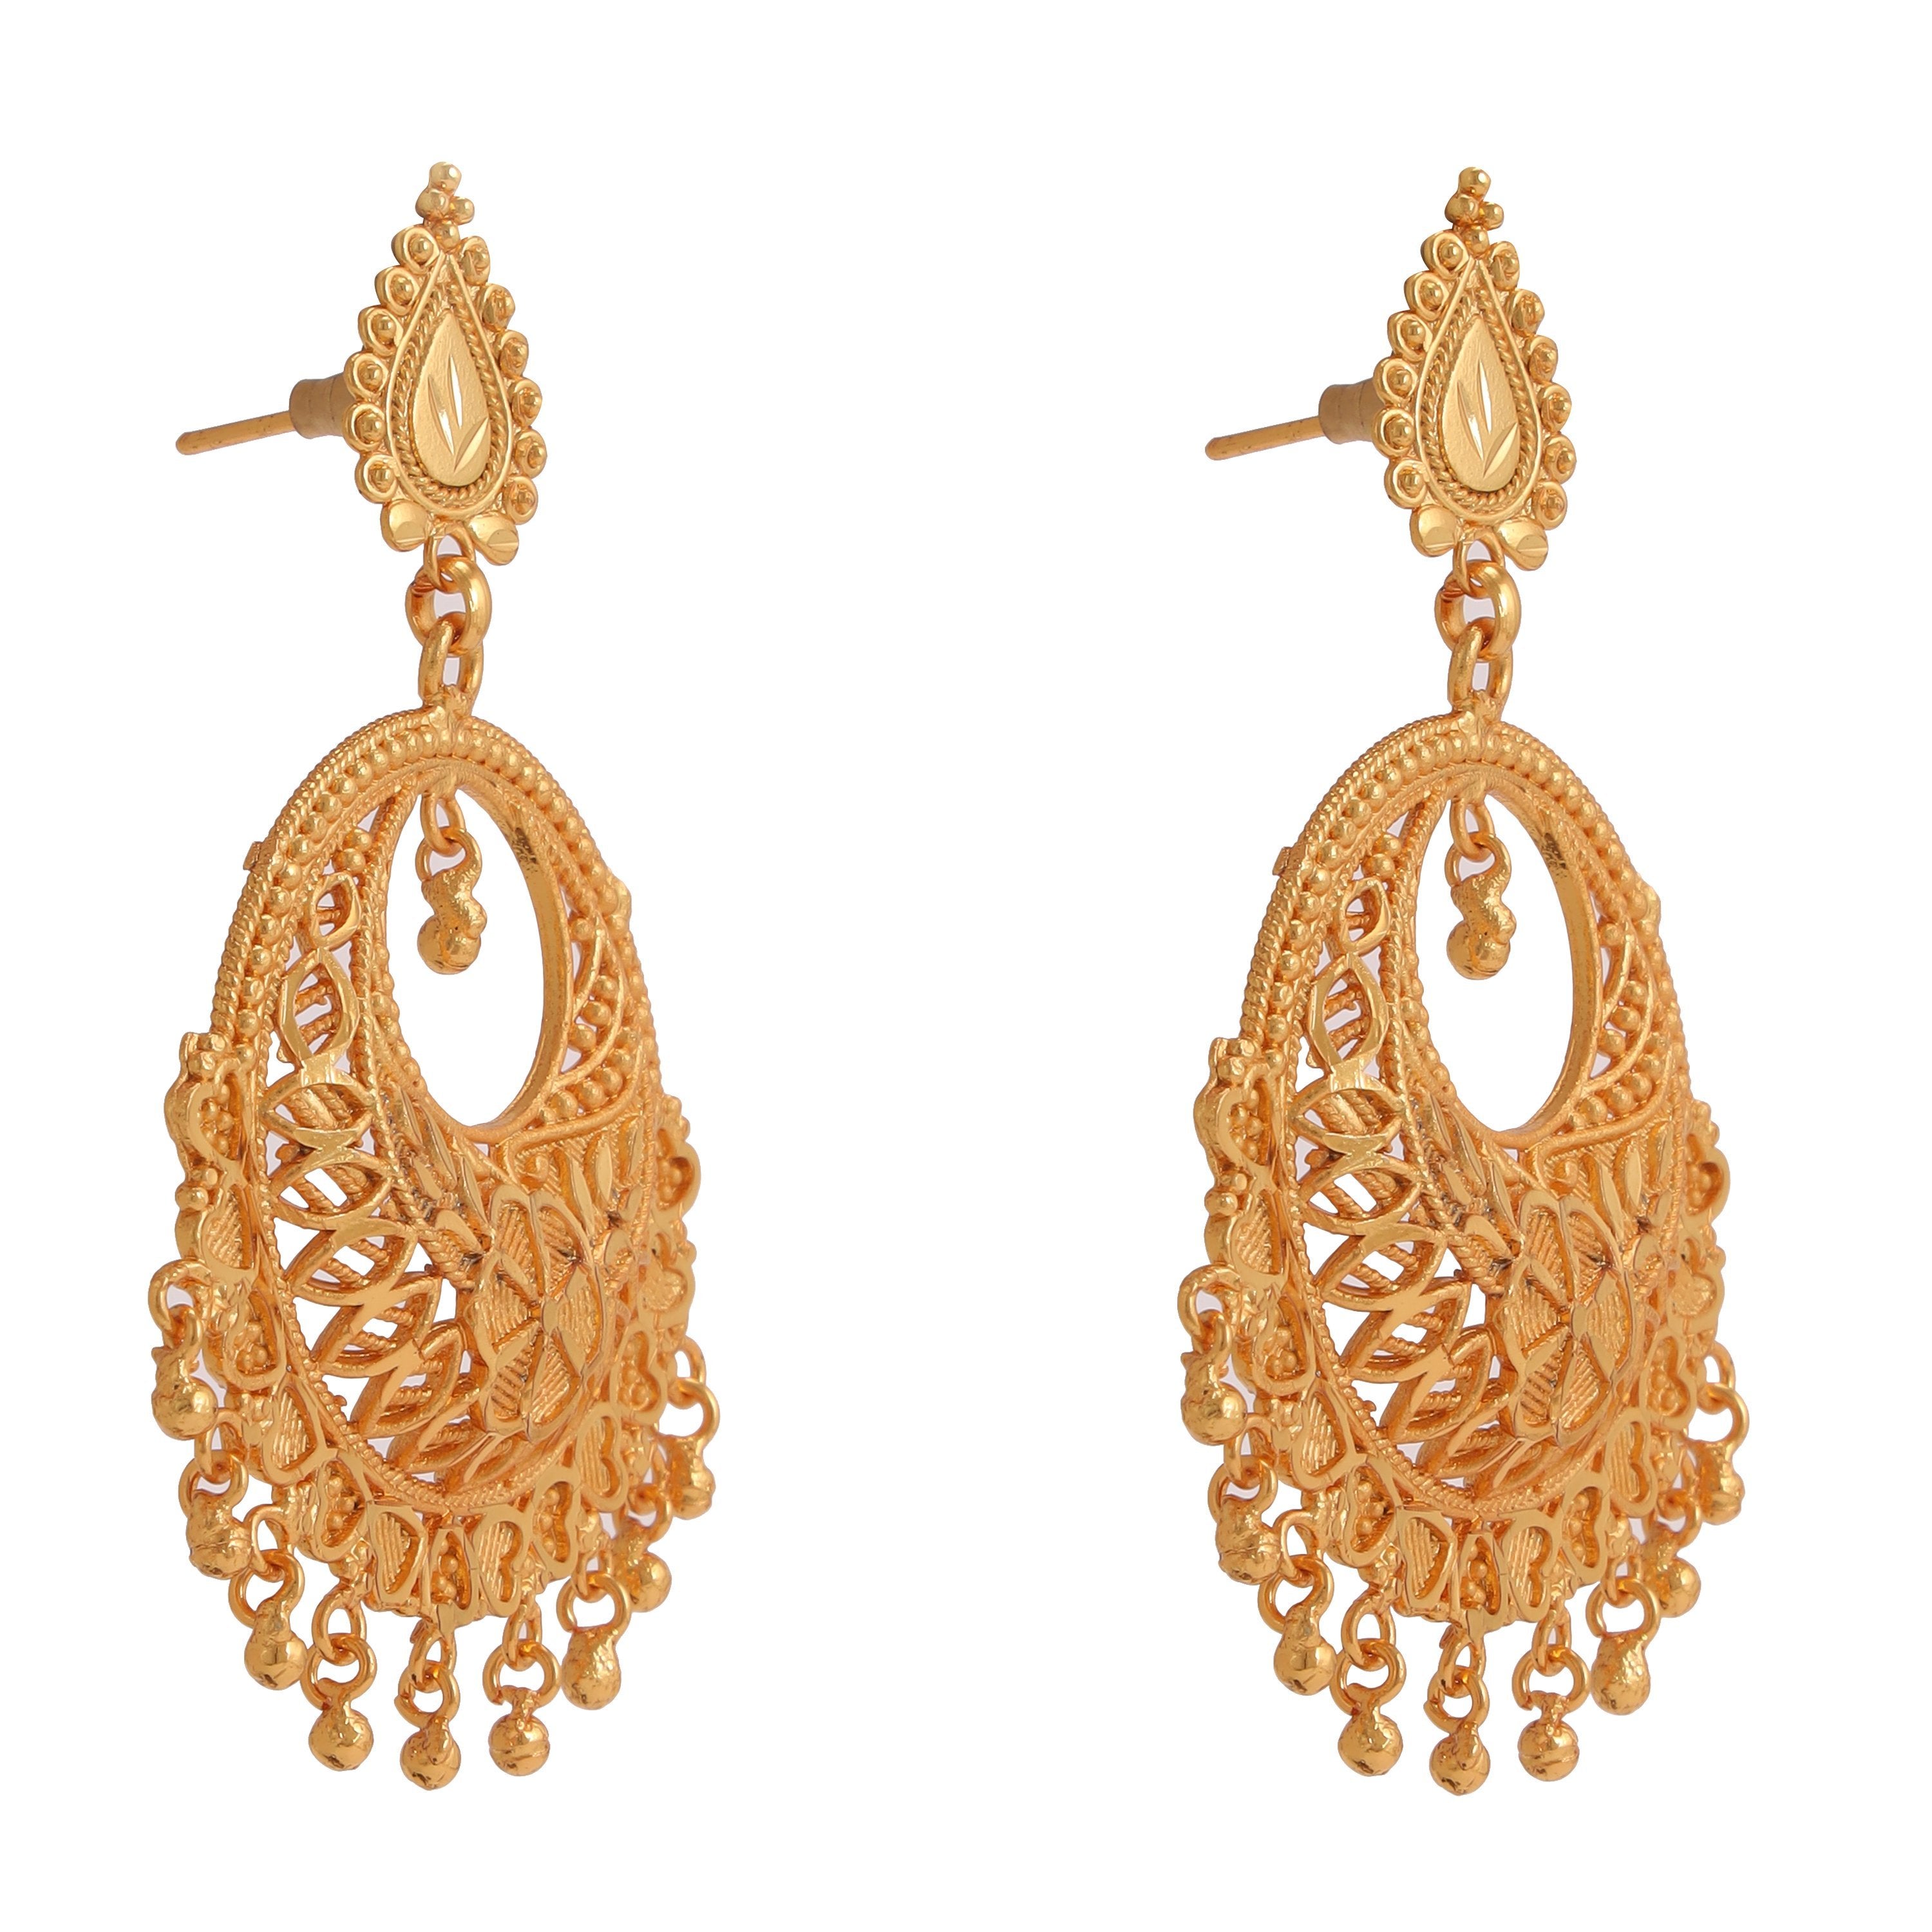 Buy Fancy Light Weight Traditional Gold Plated Antique Finish Medium Size  Jhumka Earrings for Women (Style 7) at Amazon.in